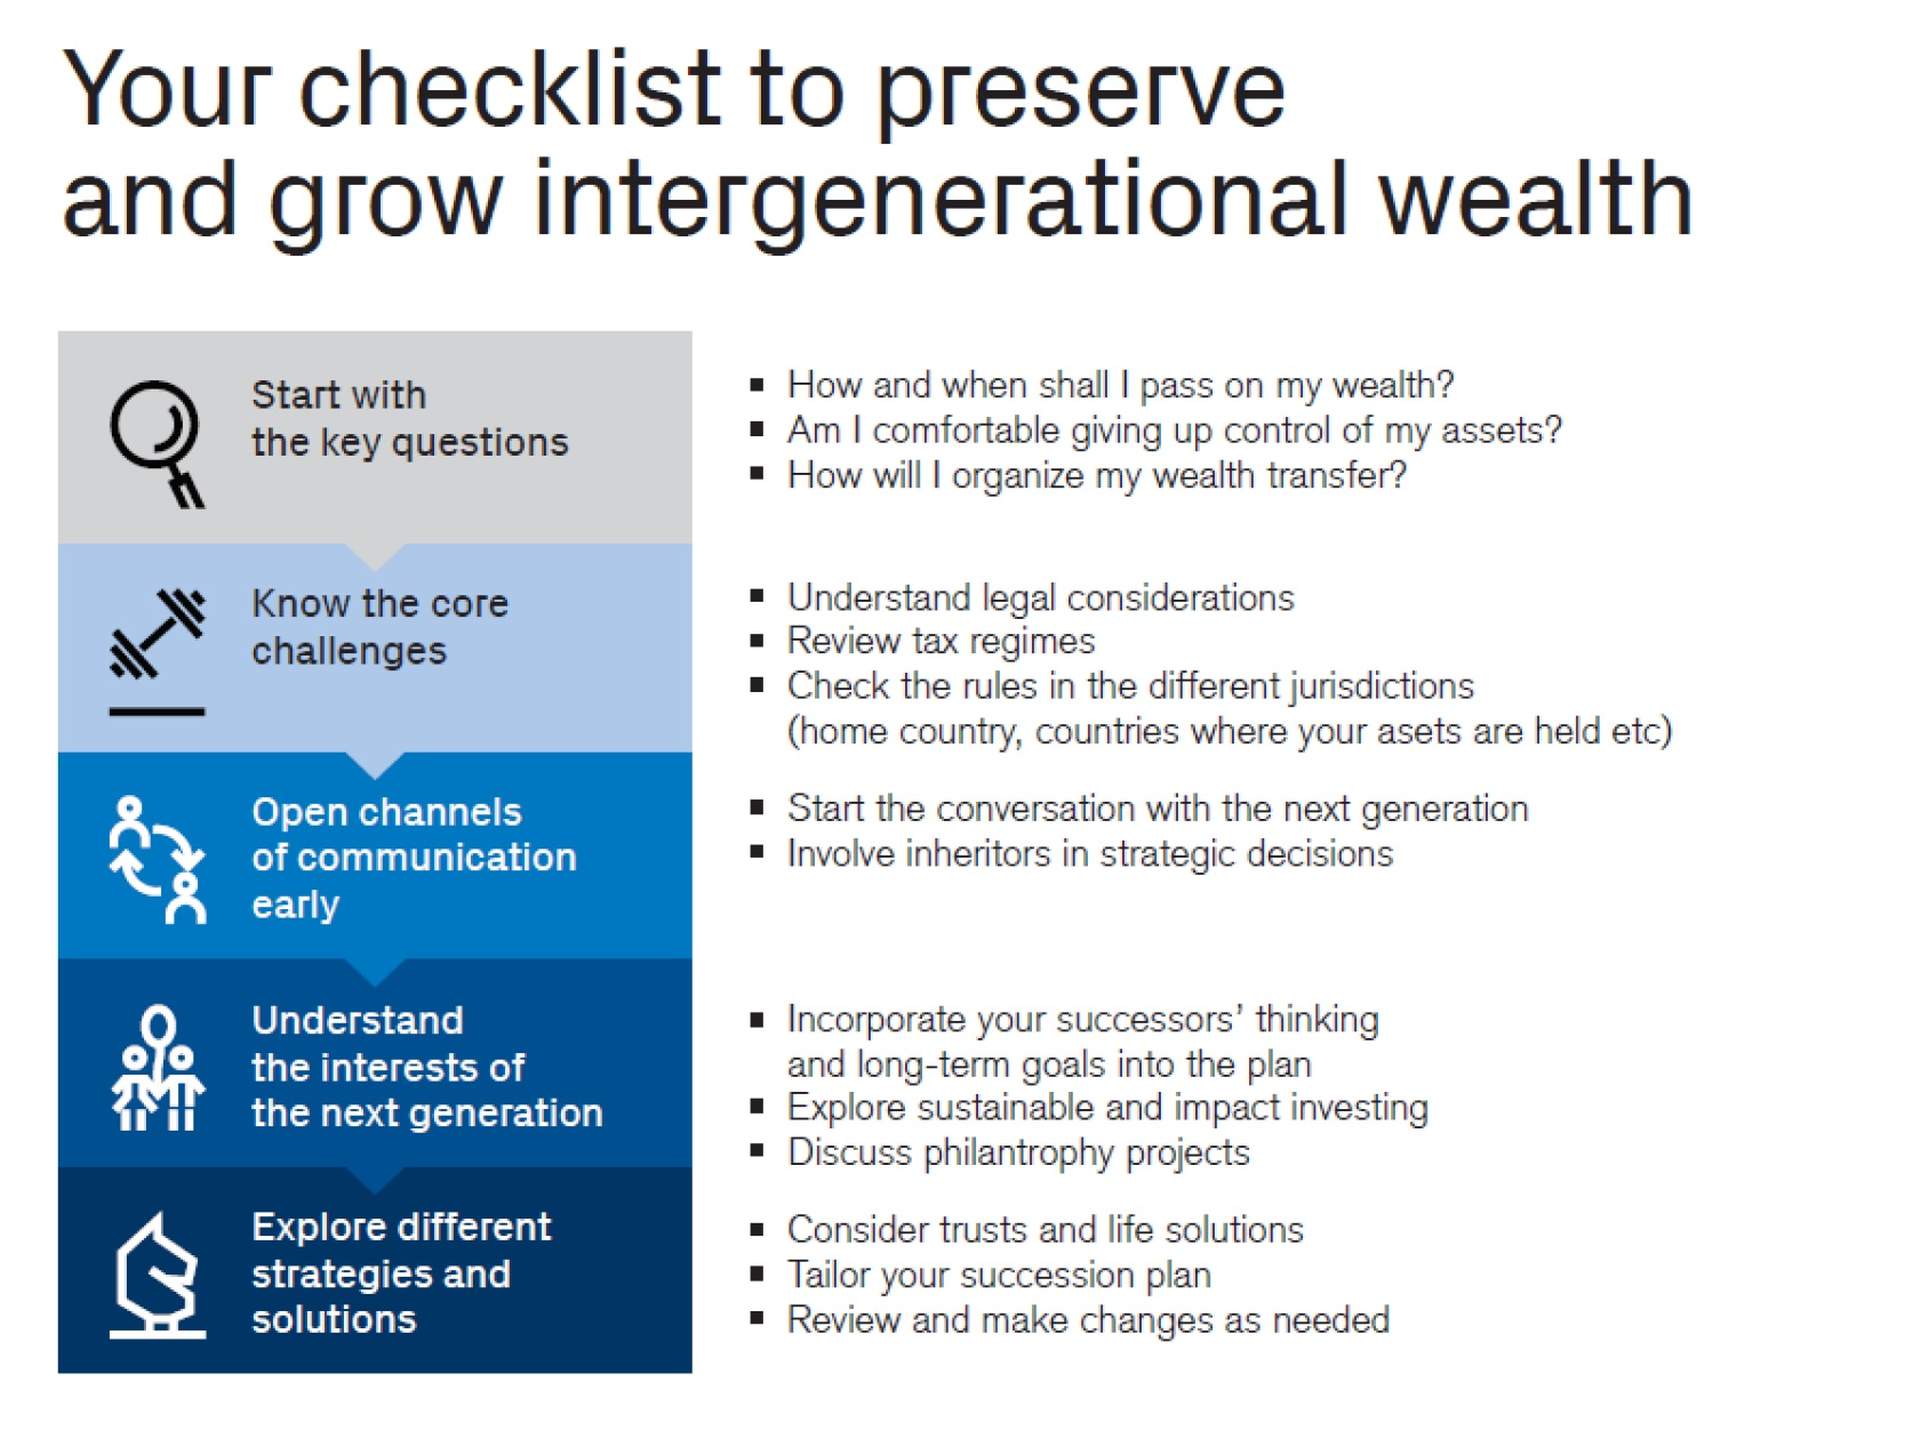 You checklist to preserve and grow intergenerational wealth